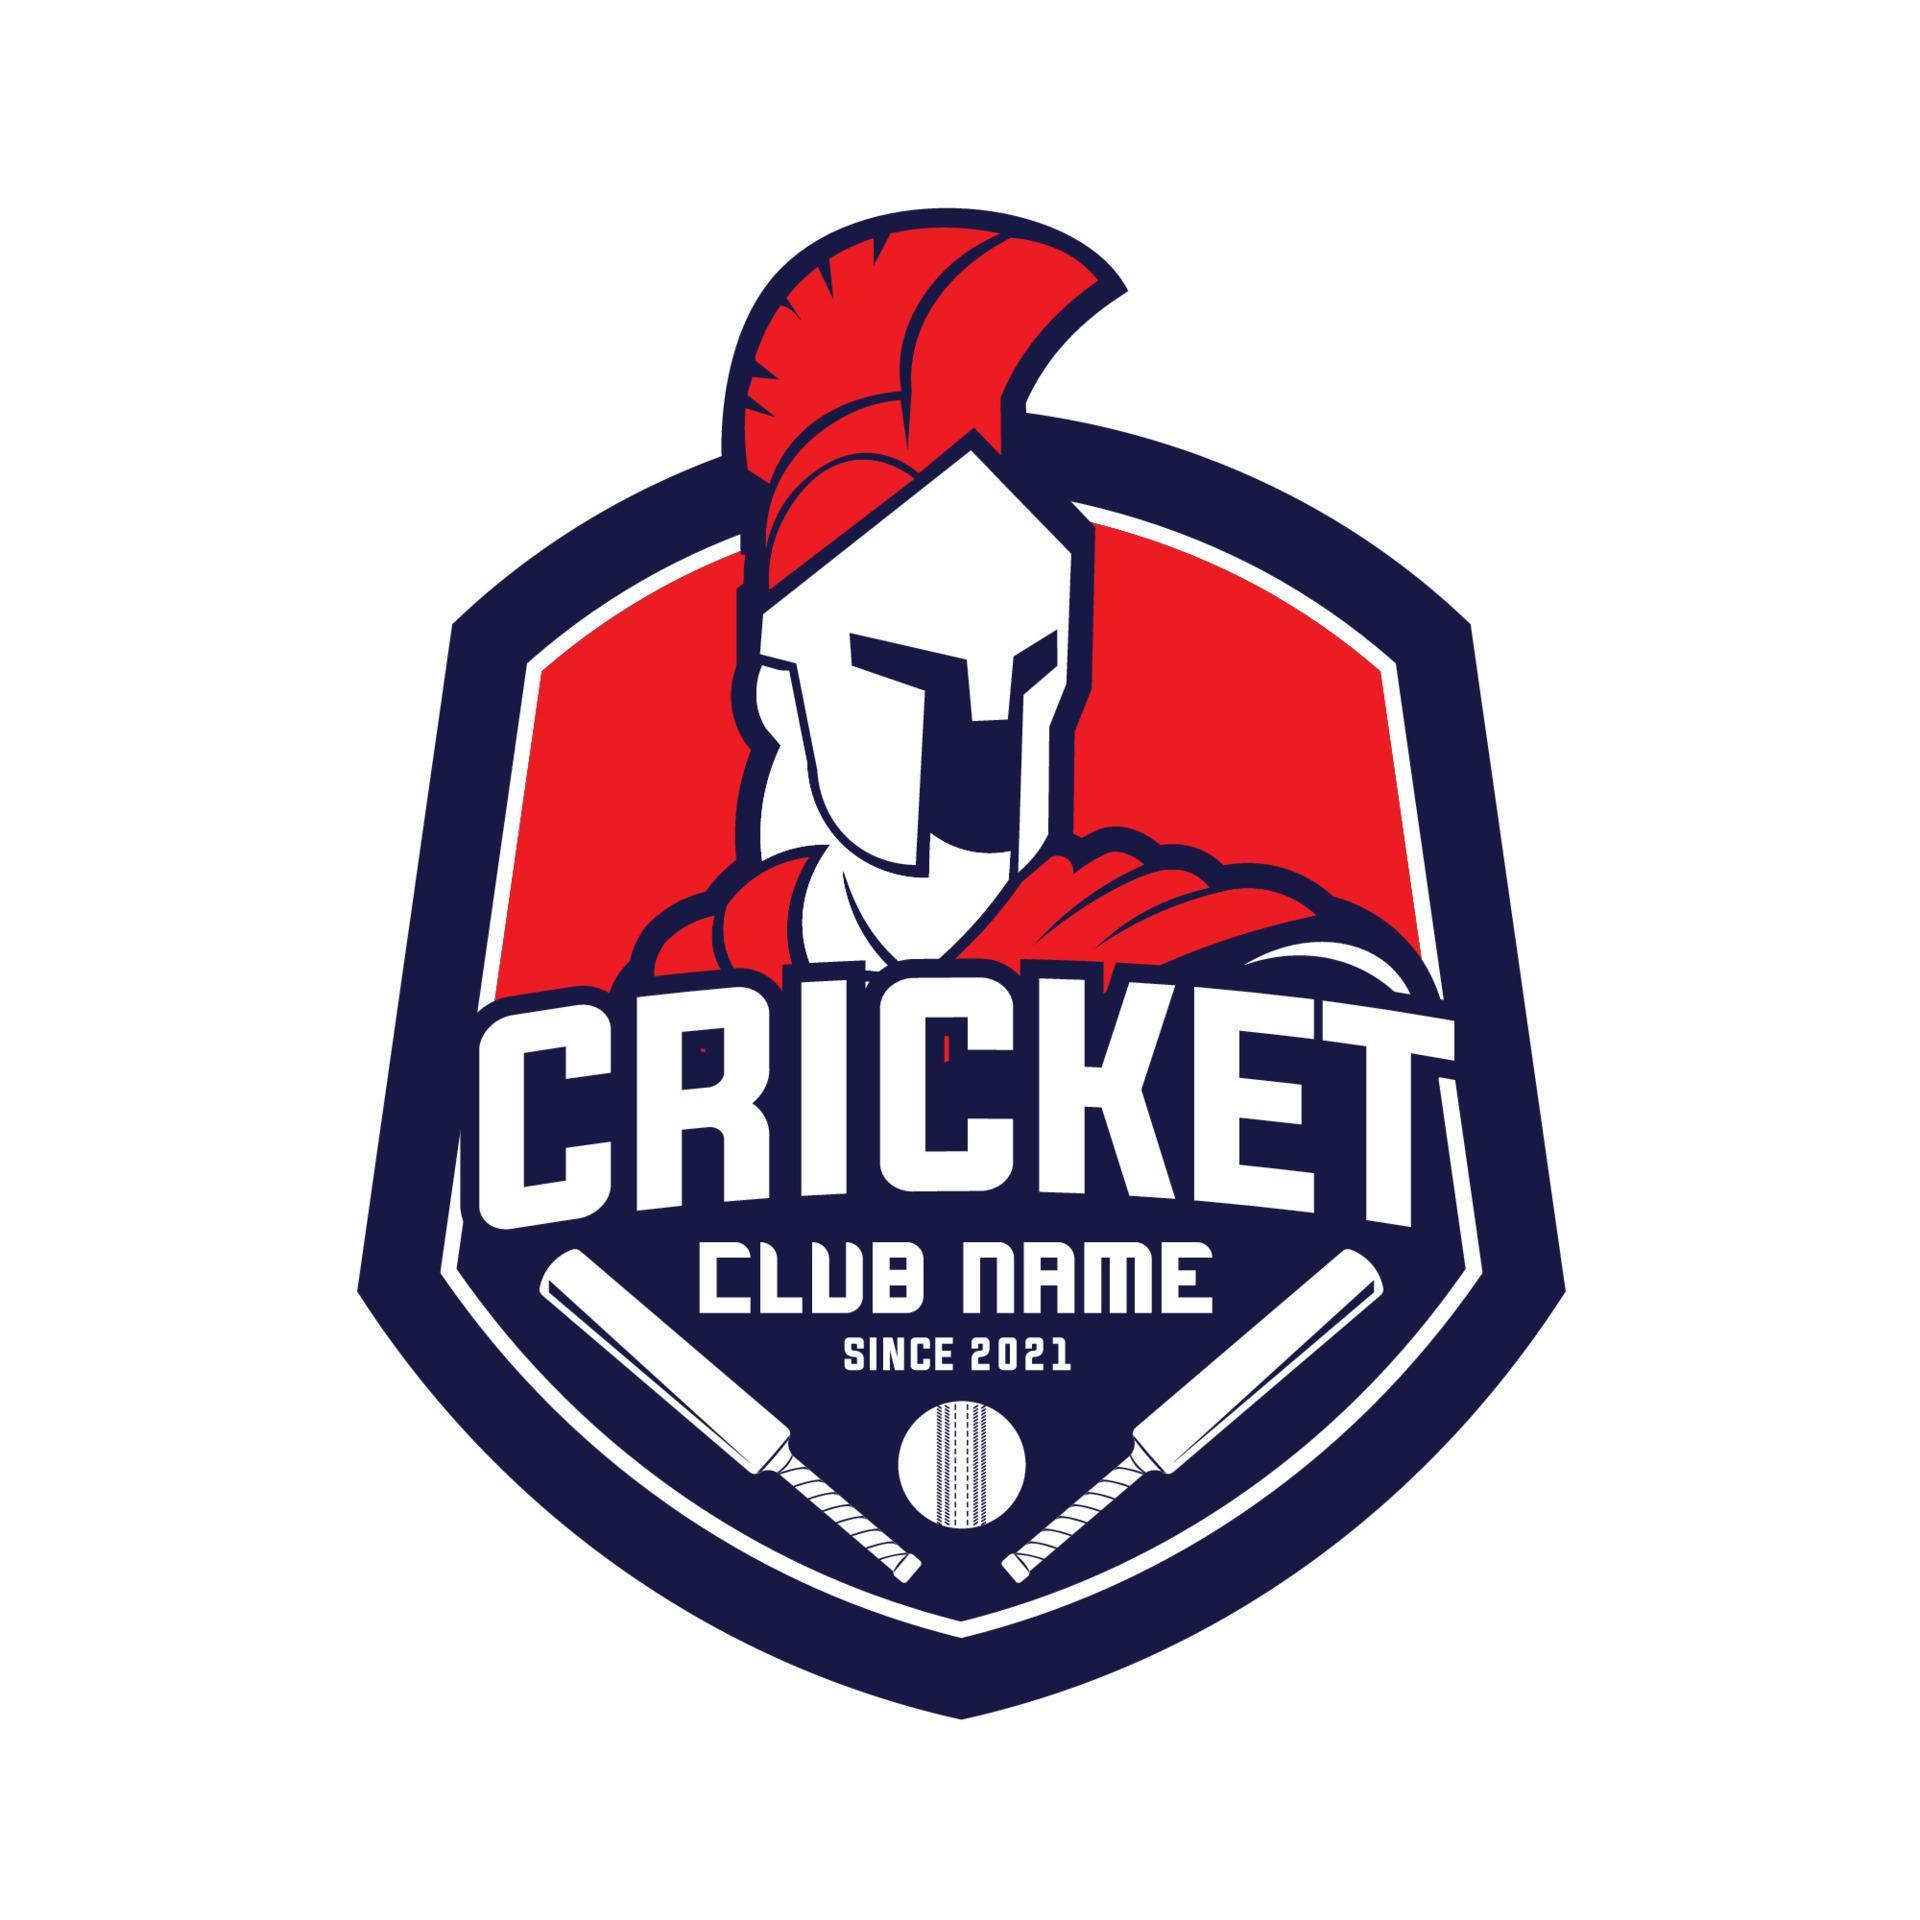 Cricket Club logo with Warrior for the mascot, perfect for Badge ...